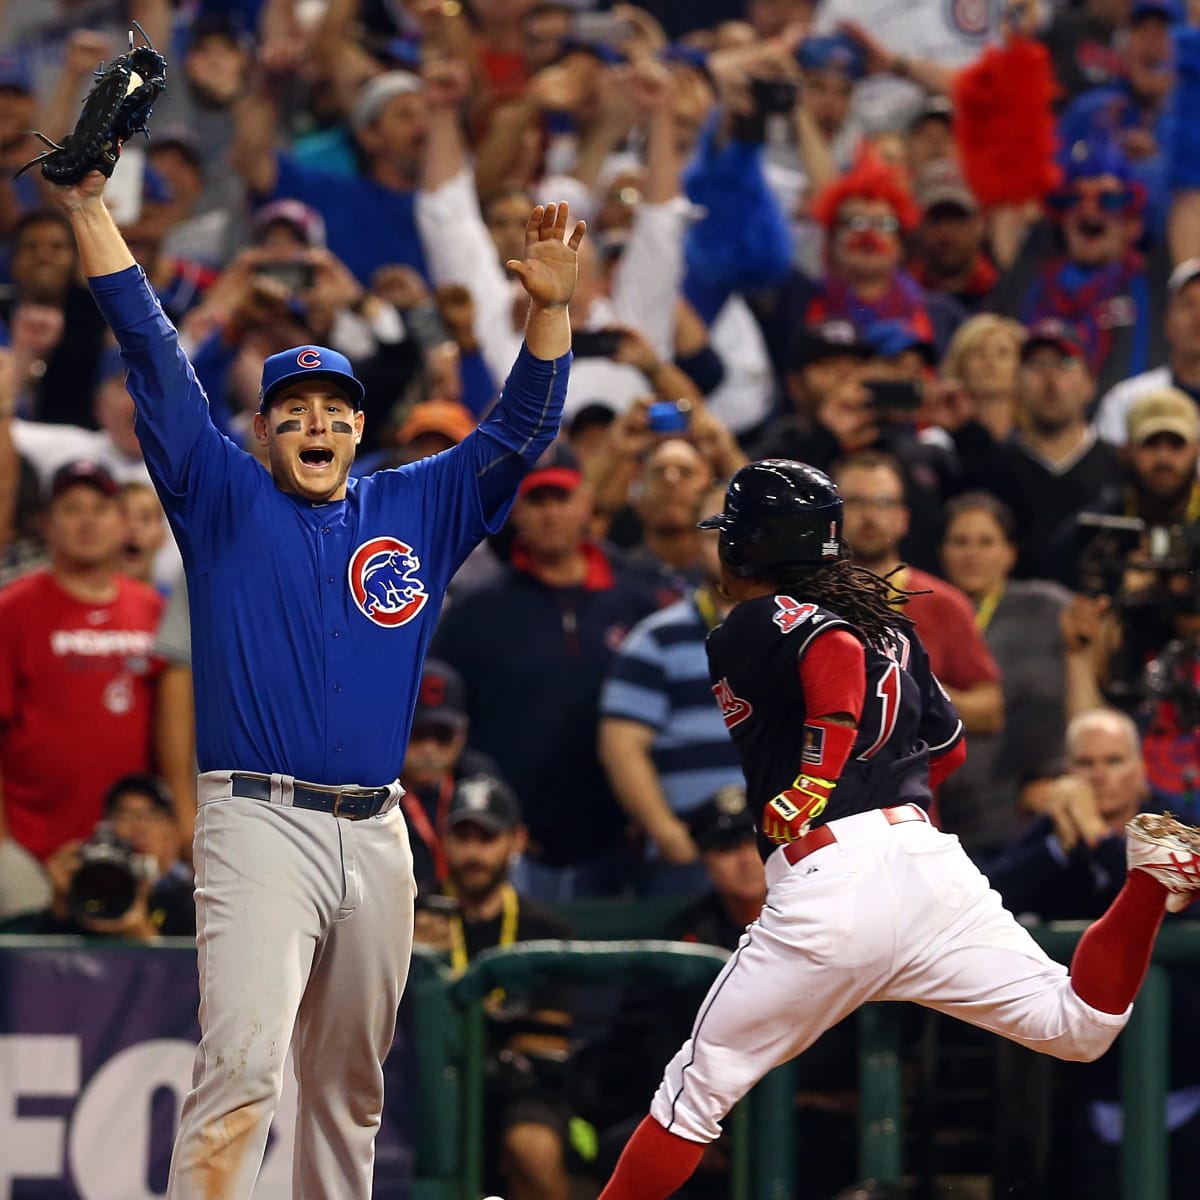 Cubs call up Kris Bryant, hottest new guy in baseball - Outsports